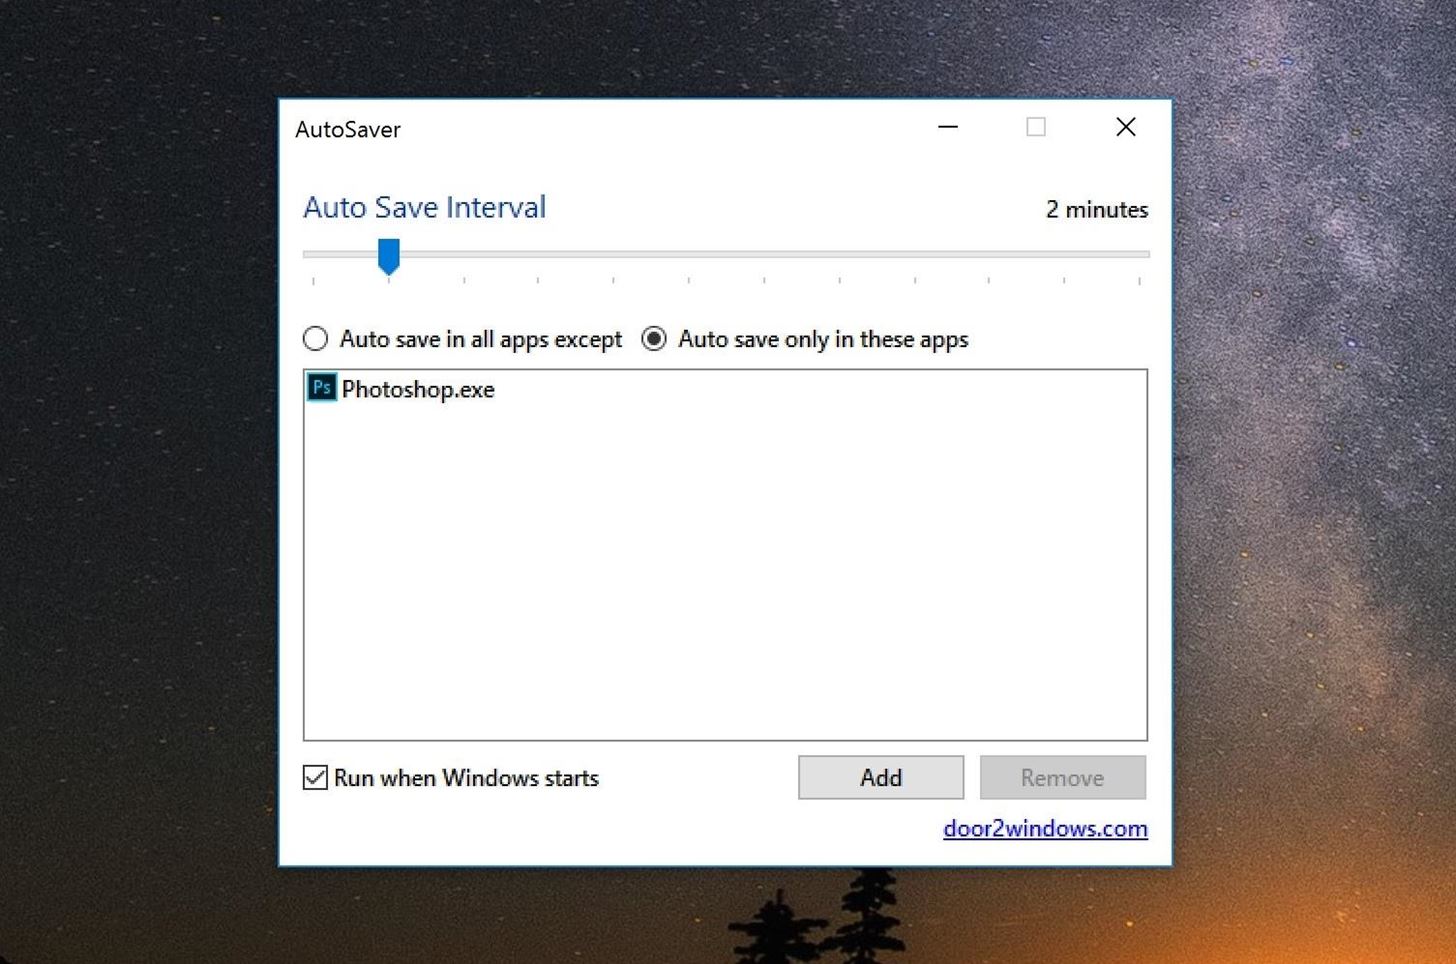 This Tool Gives You Auto-Save Features in Any Windows App